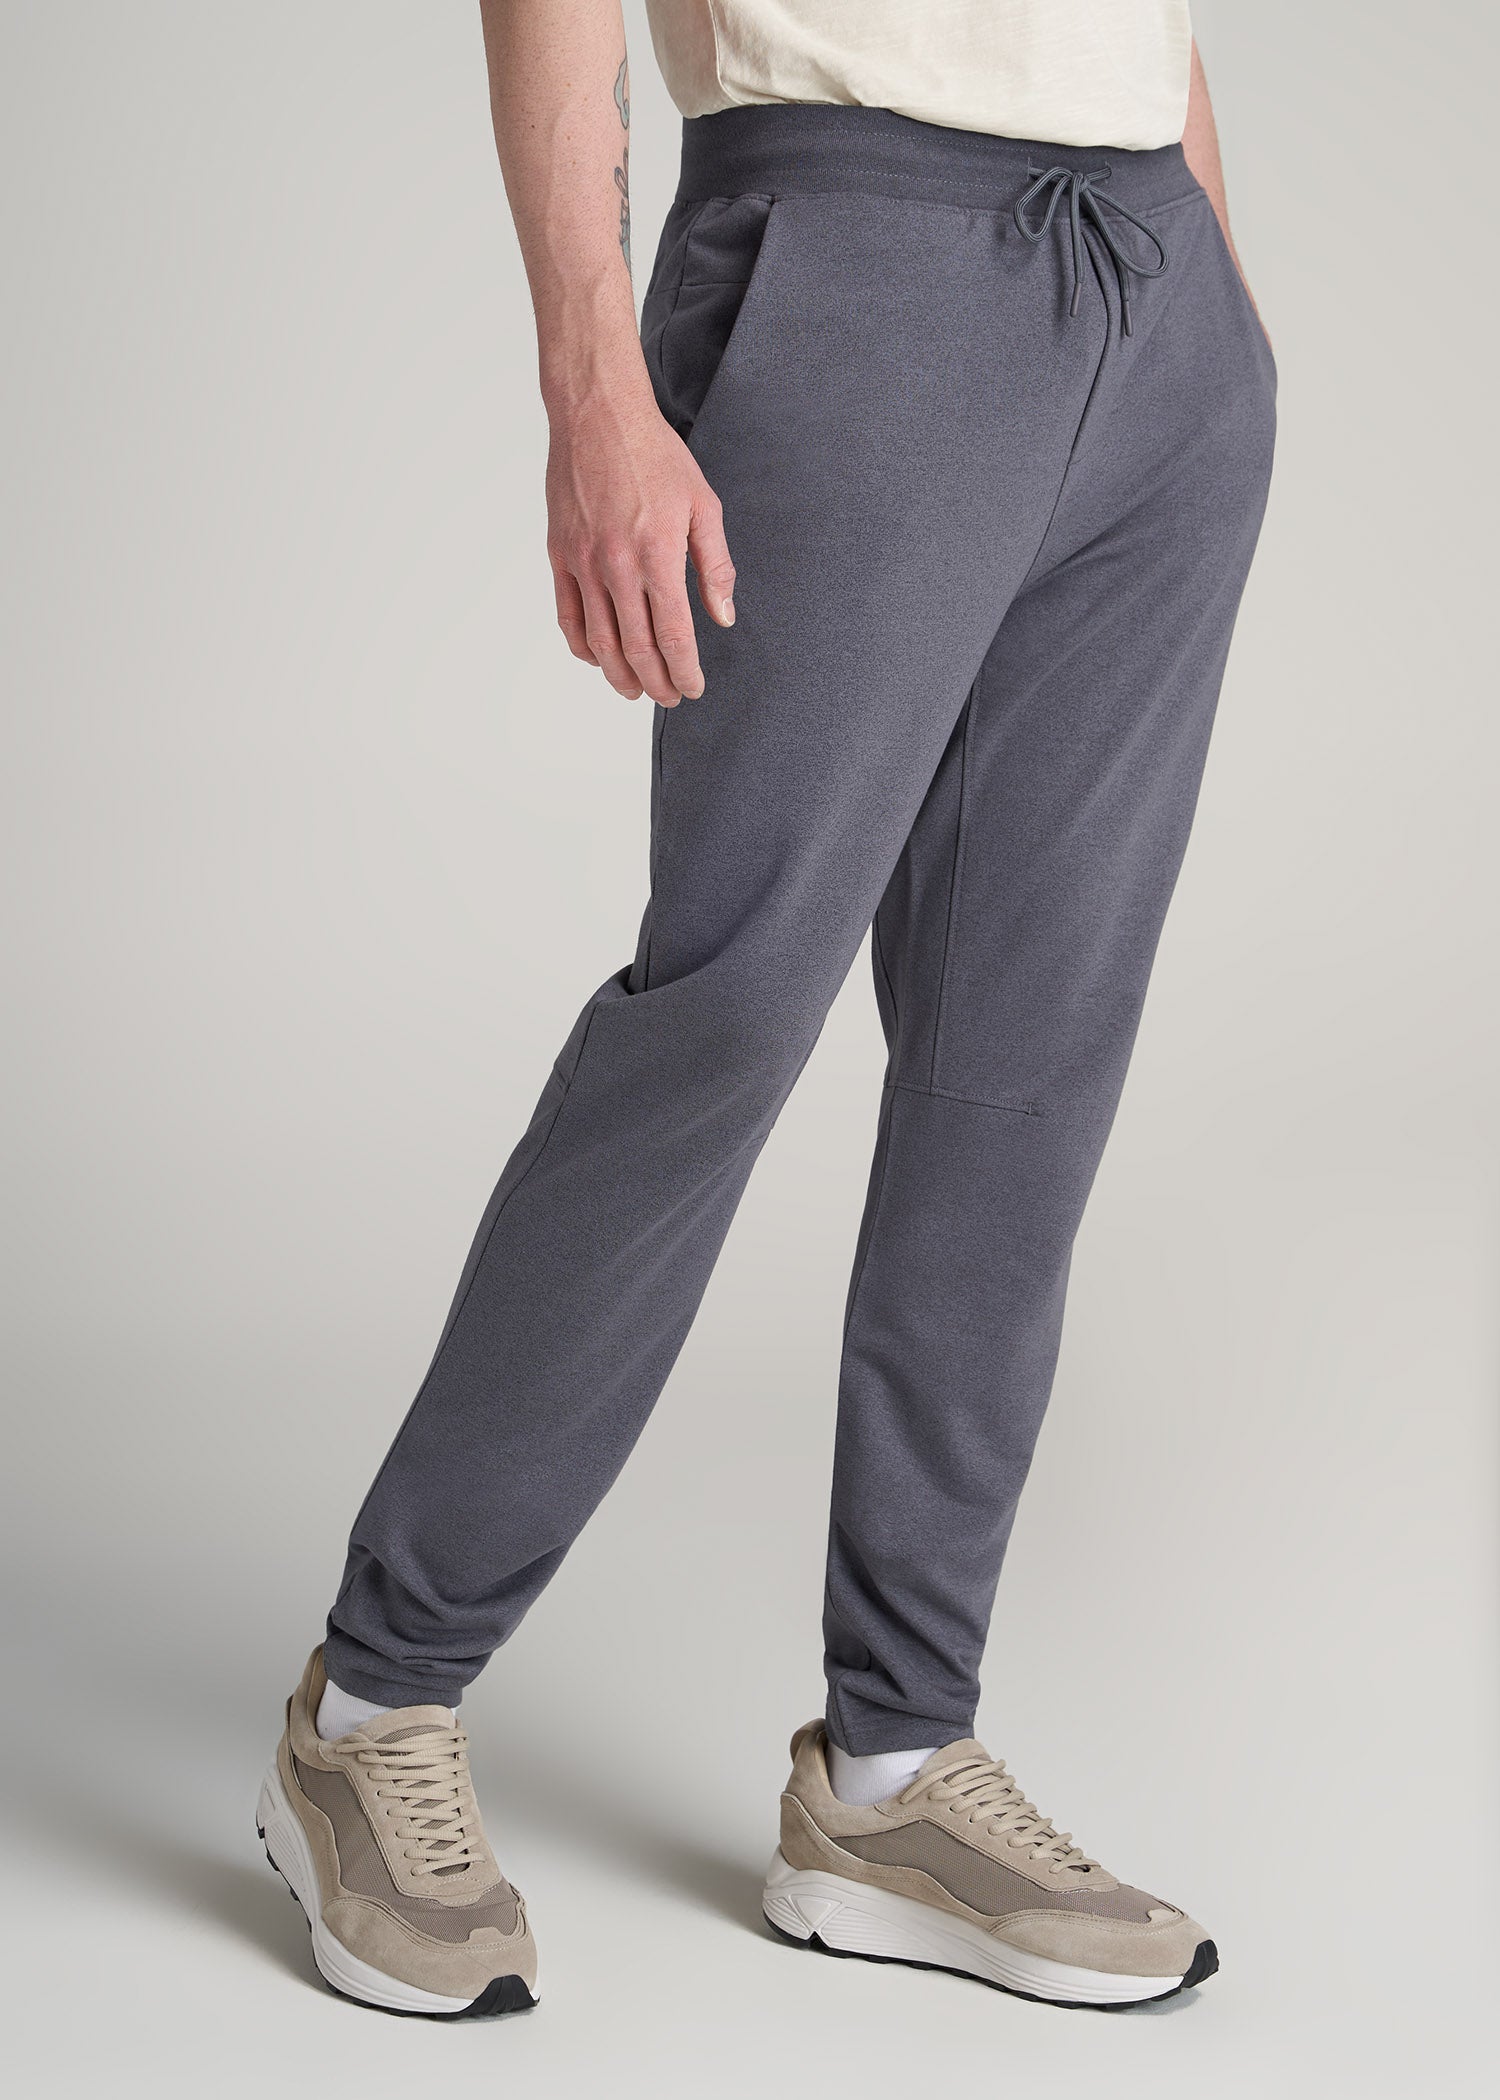 French Terry Sweatpants for Tall Men | American Tall